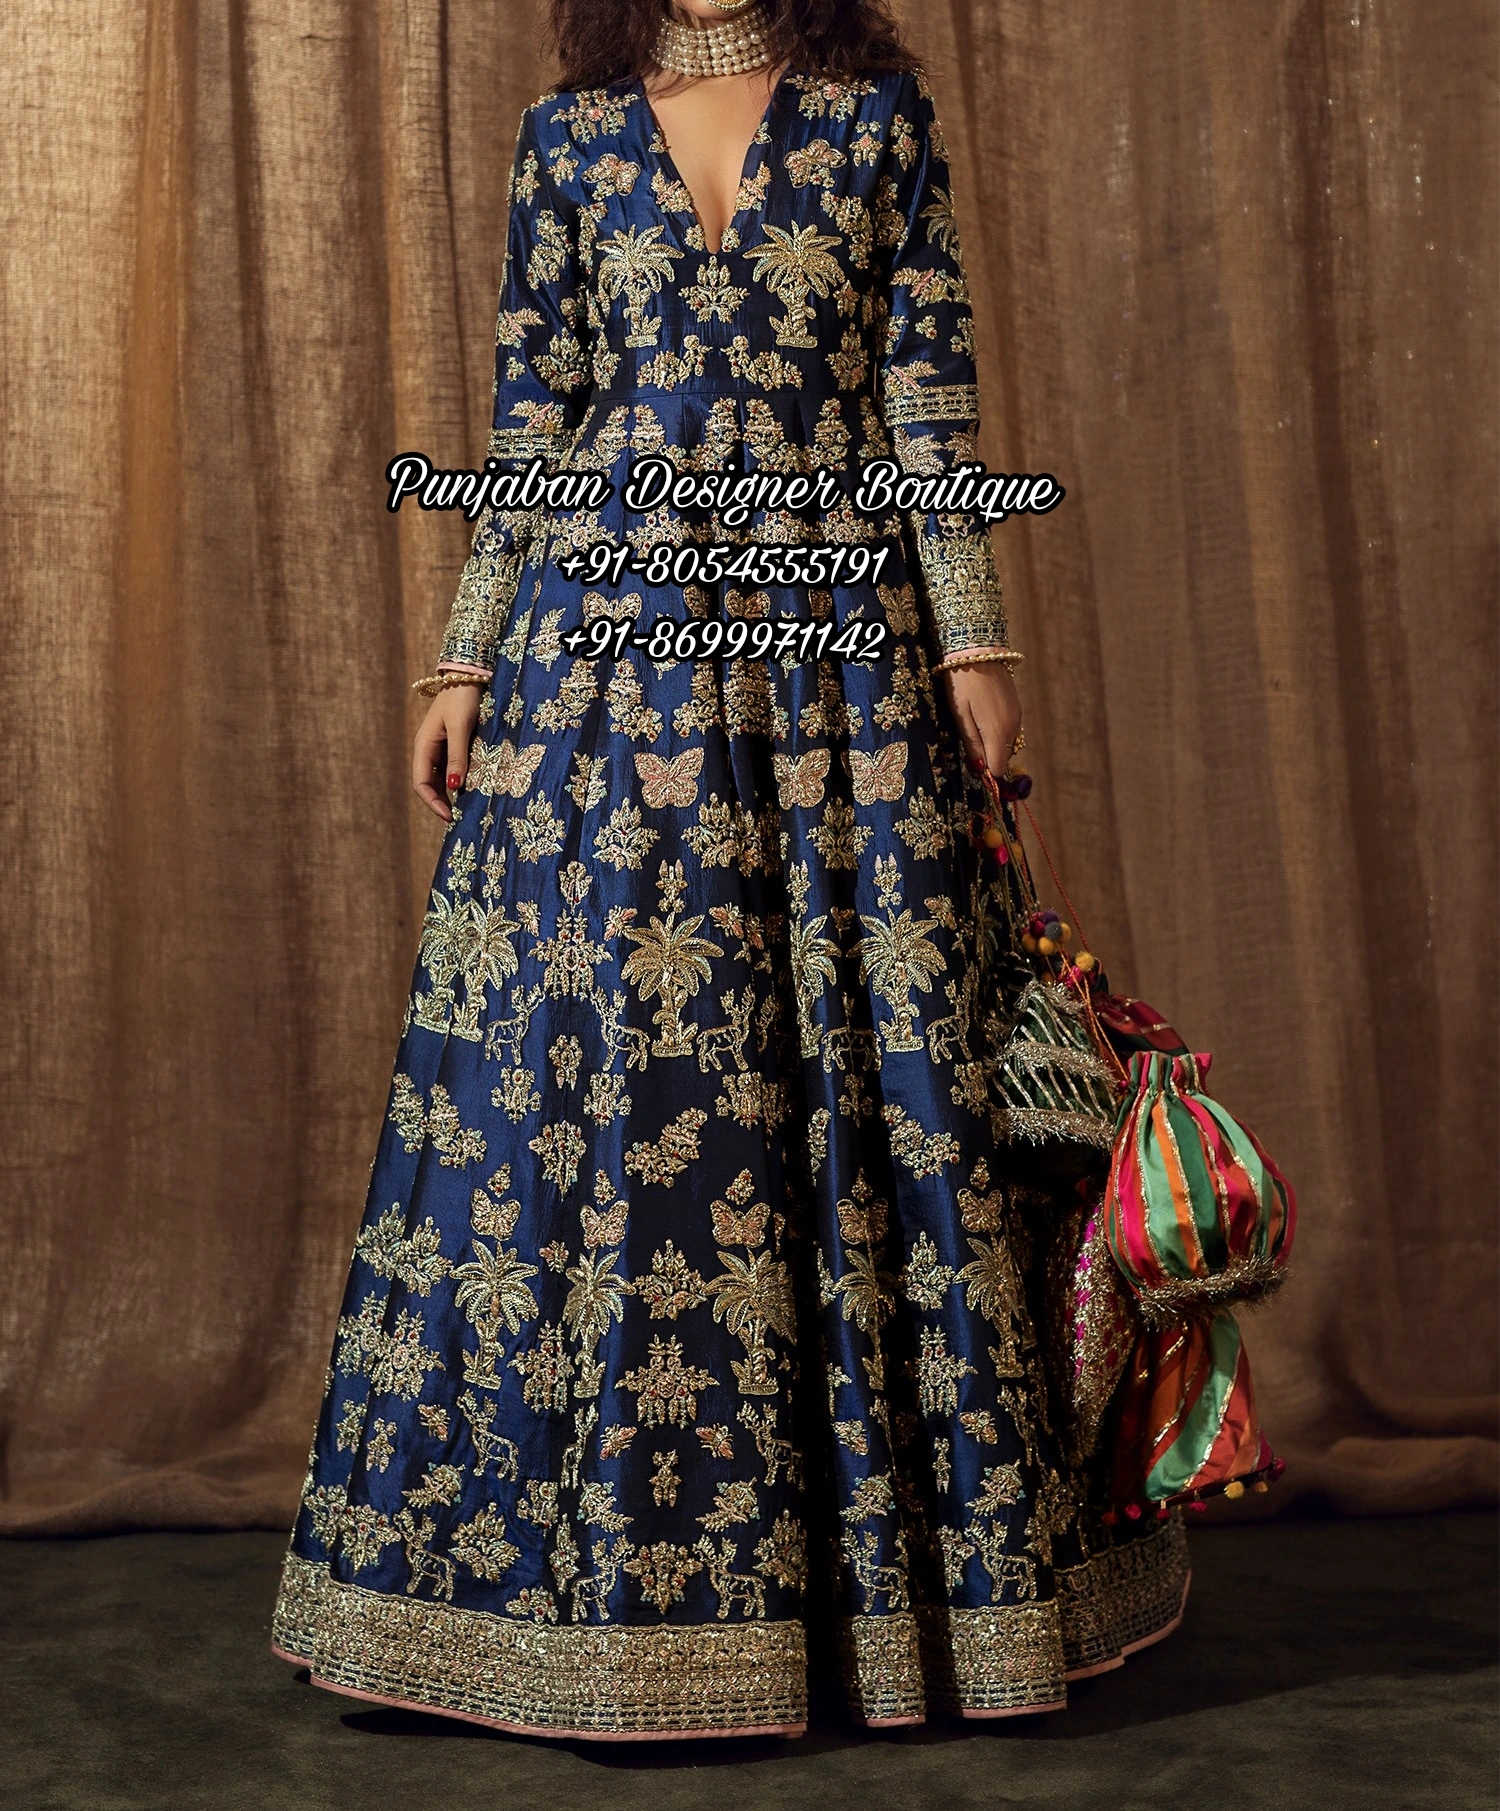 Bulk Buy India Wholesale Wedding, Party Wear, Beautiful Neck And Waist Designer  Gown With Stone Beads Work. $510 from Kalika Fasionista | Globalsources.com